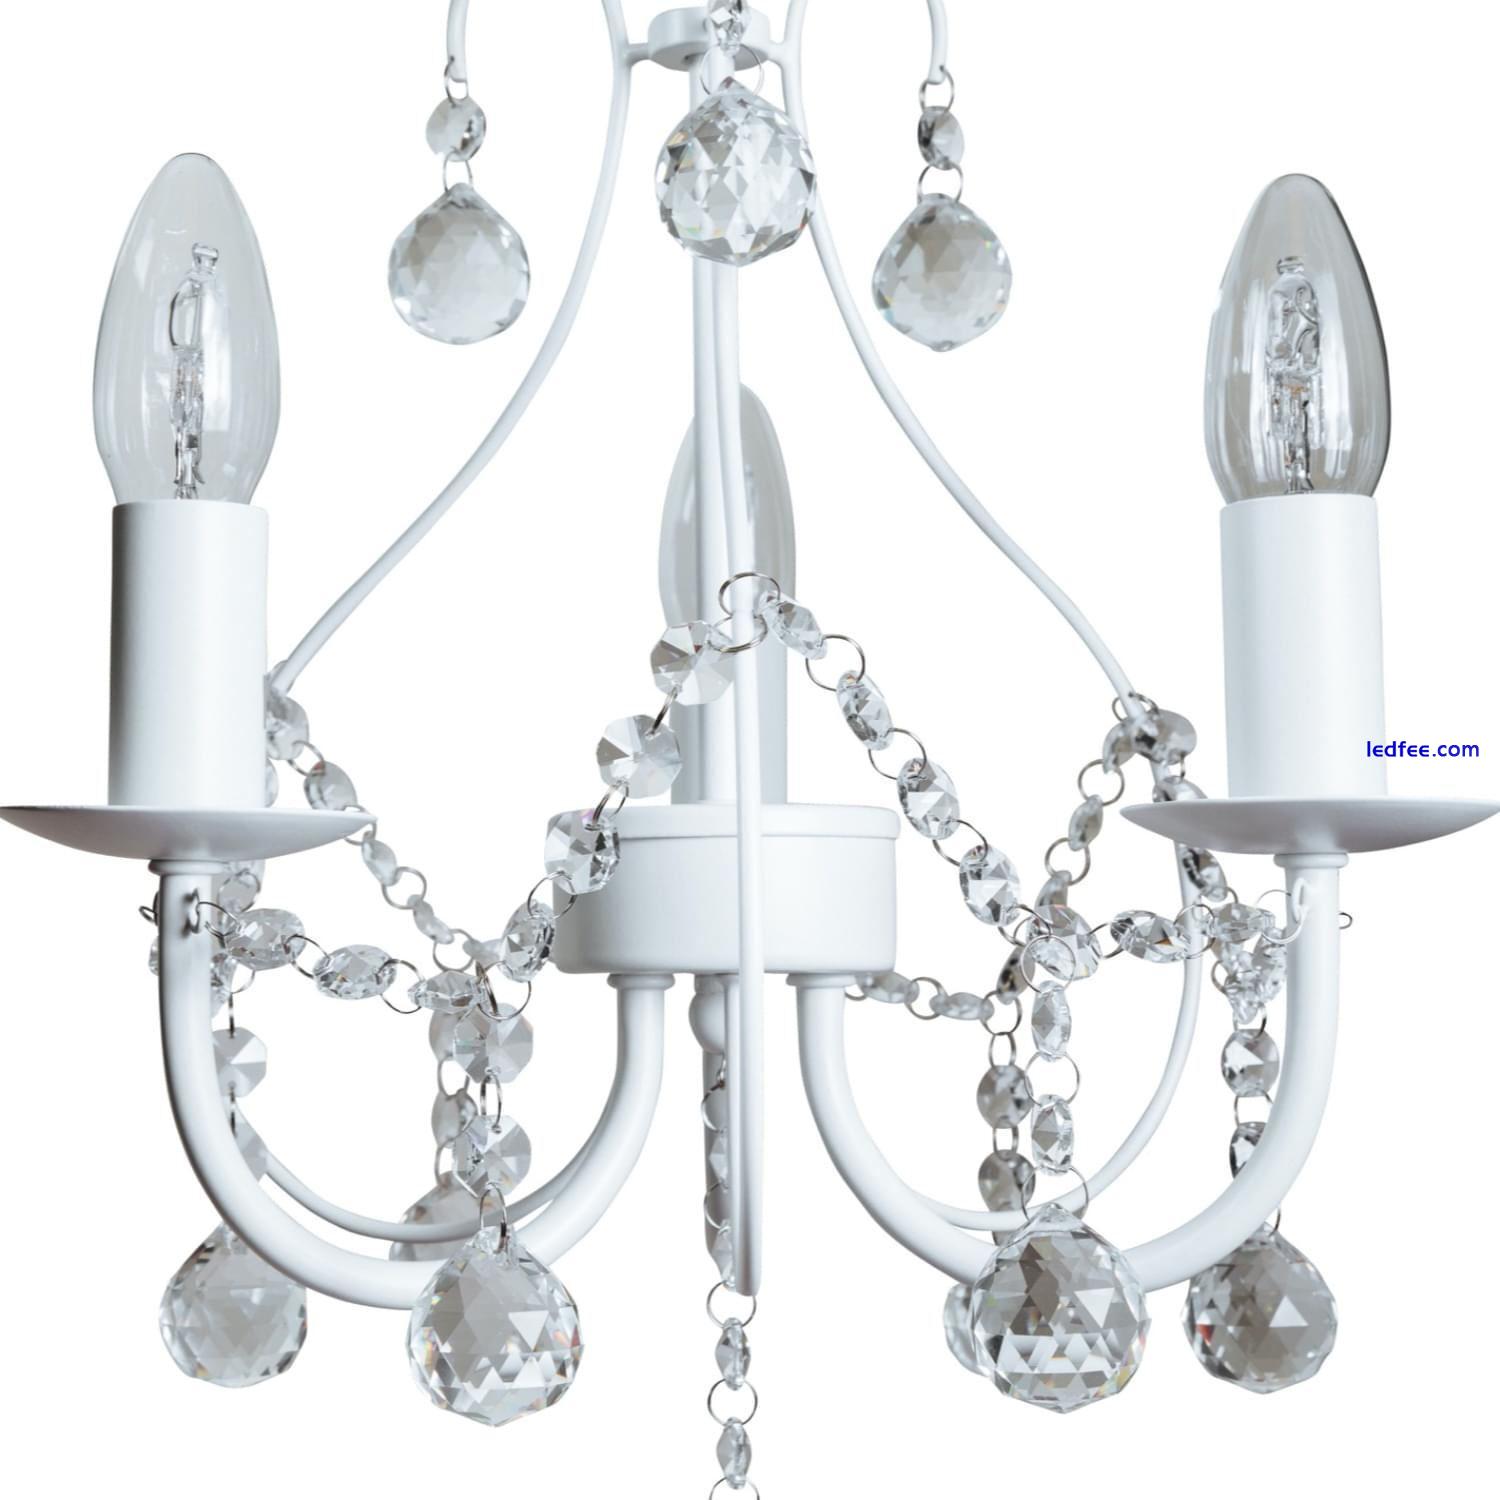 Luxury White & Crystal 3 Light Ceiling Fitting Chandelier Light Lounge Sapparia 1 